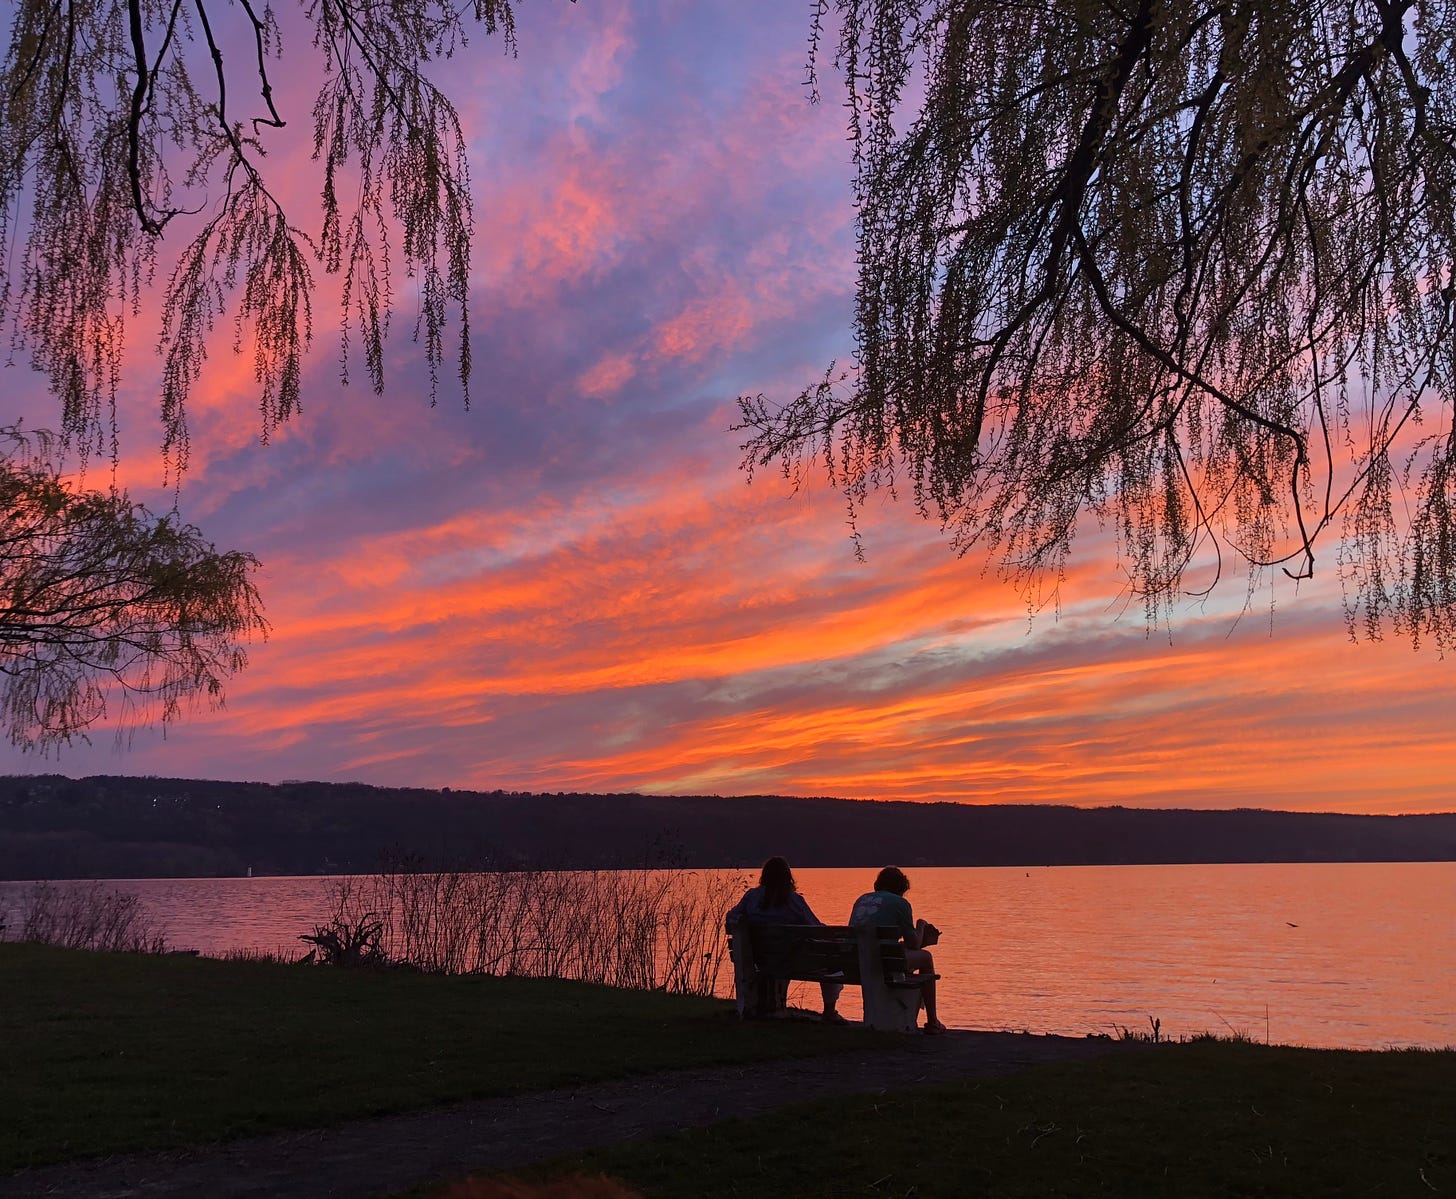 A bright orange, pink, and purple sunset over Cayuga Lake. Two people sit on a bench in the foreground and willow branches frame the sky.